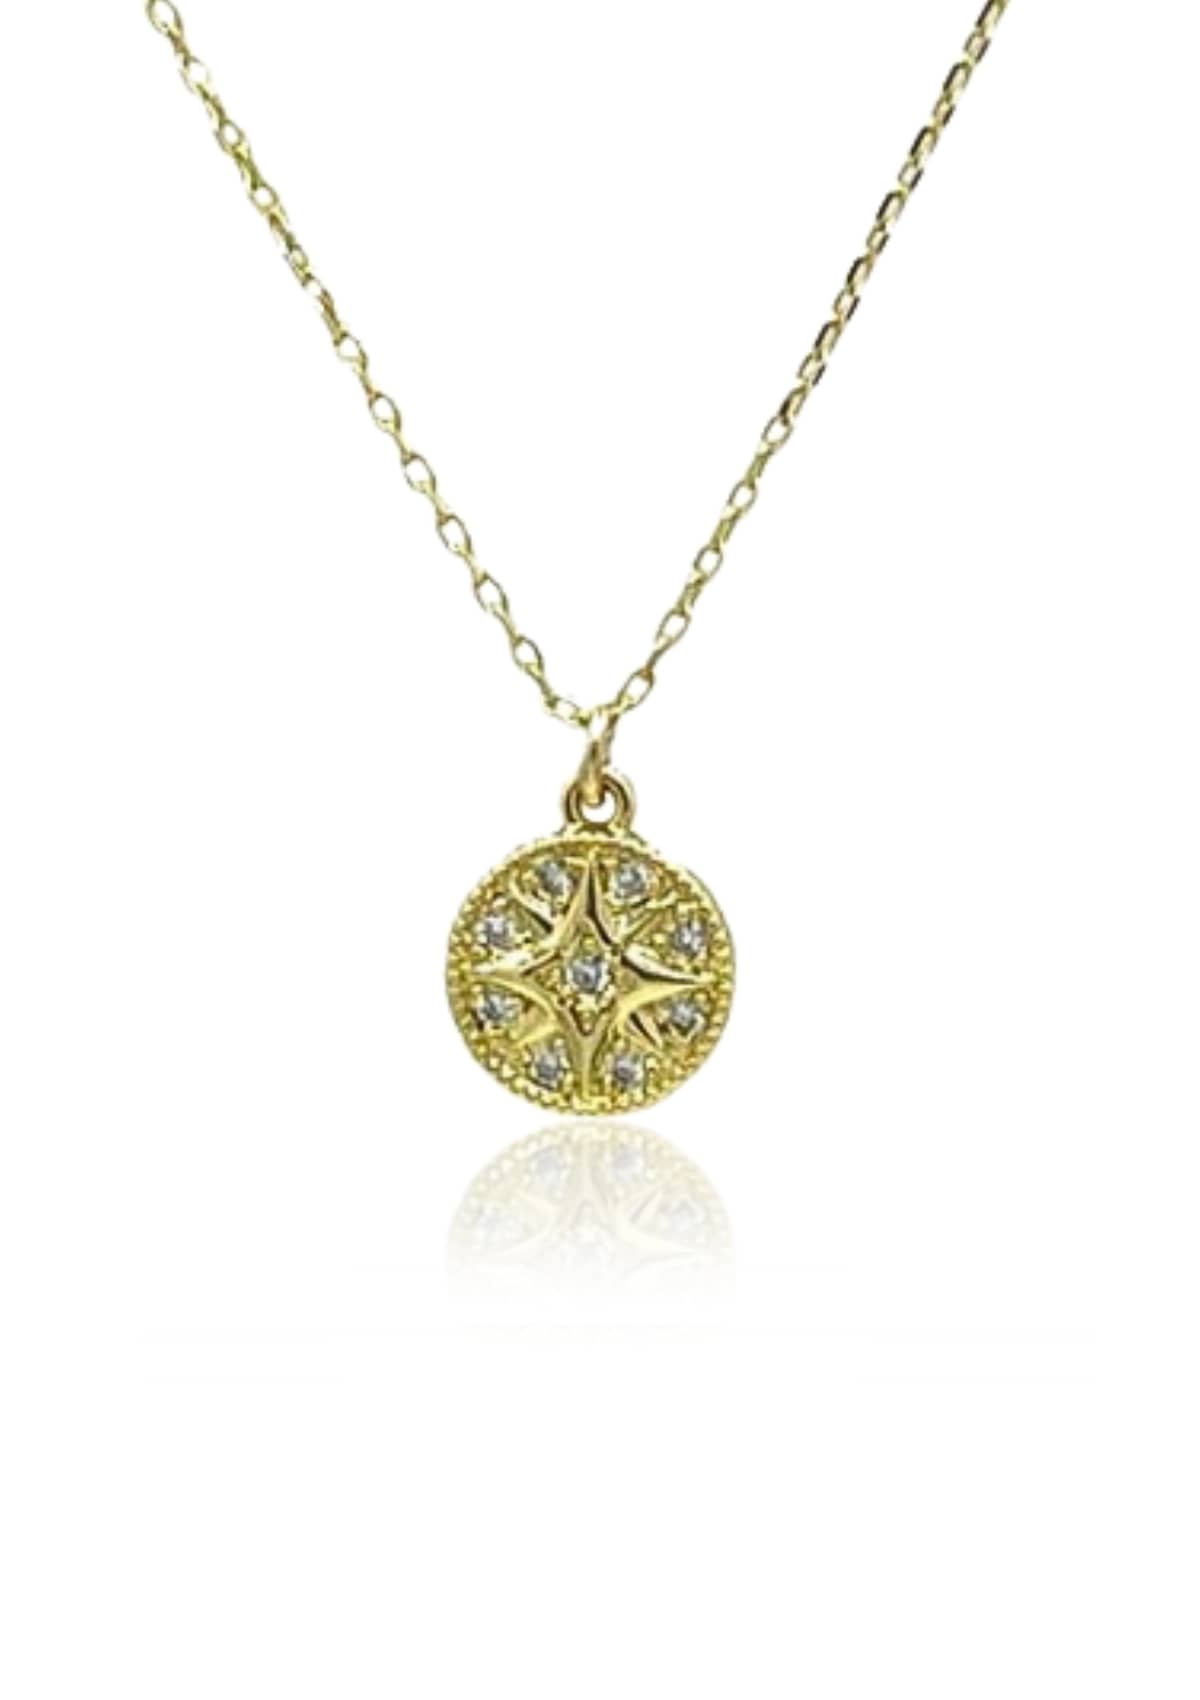 Gold chain necklace with round pendant with star in middle.